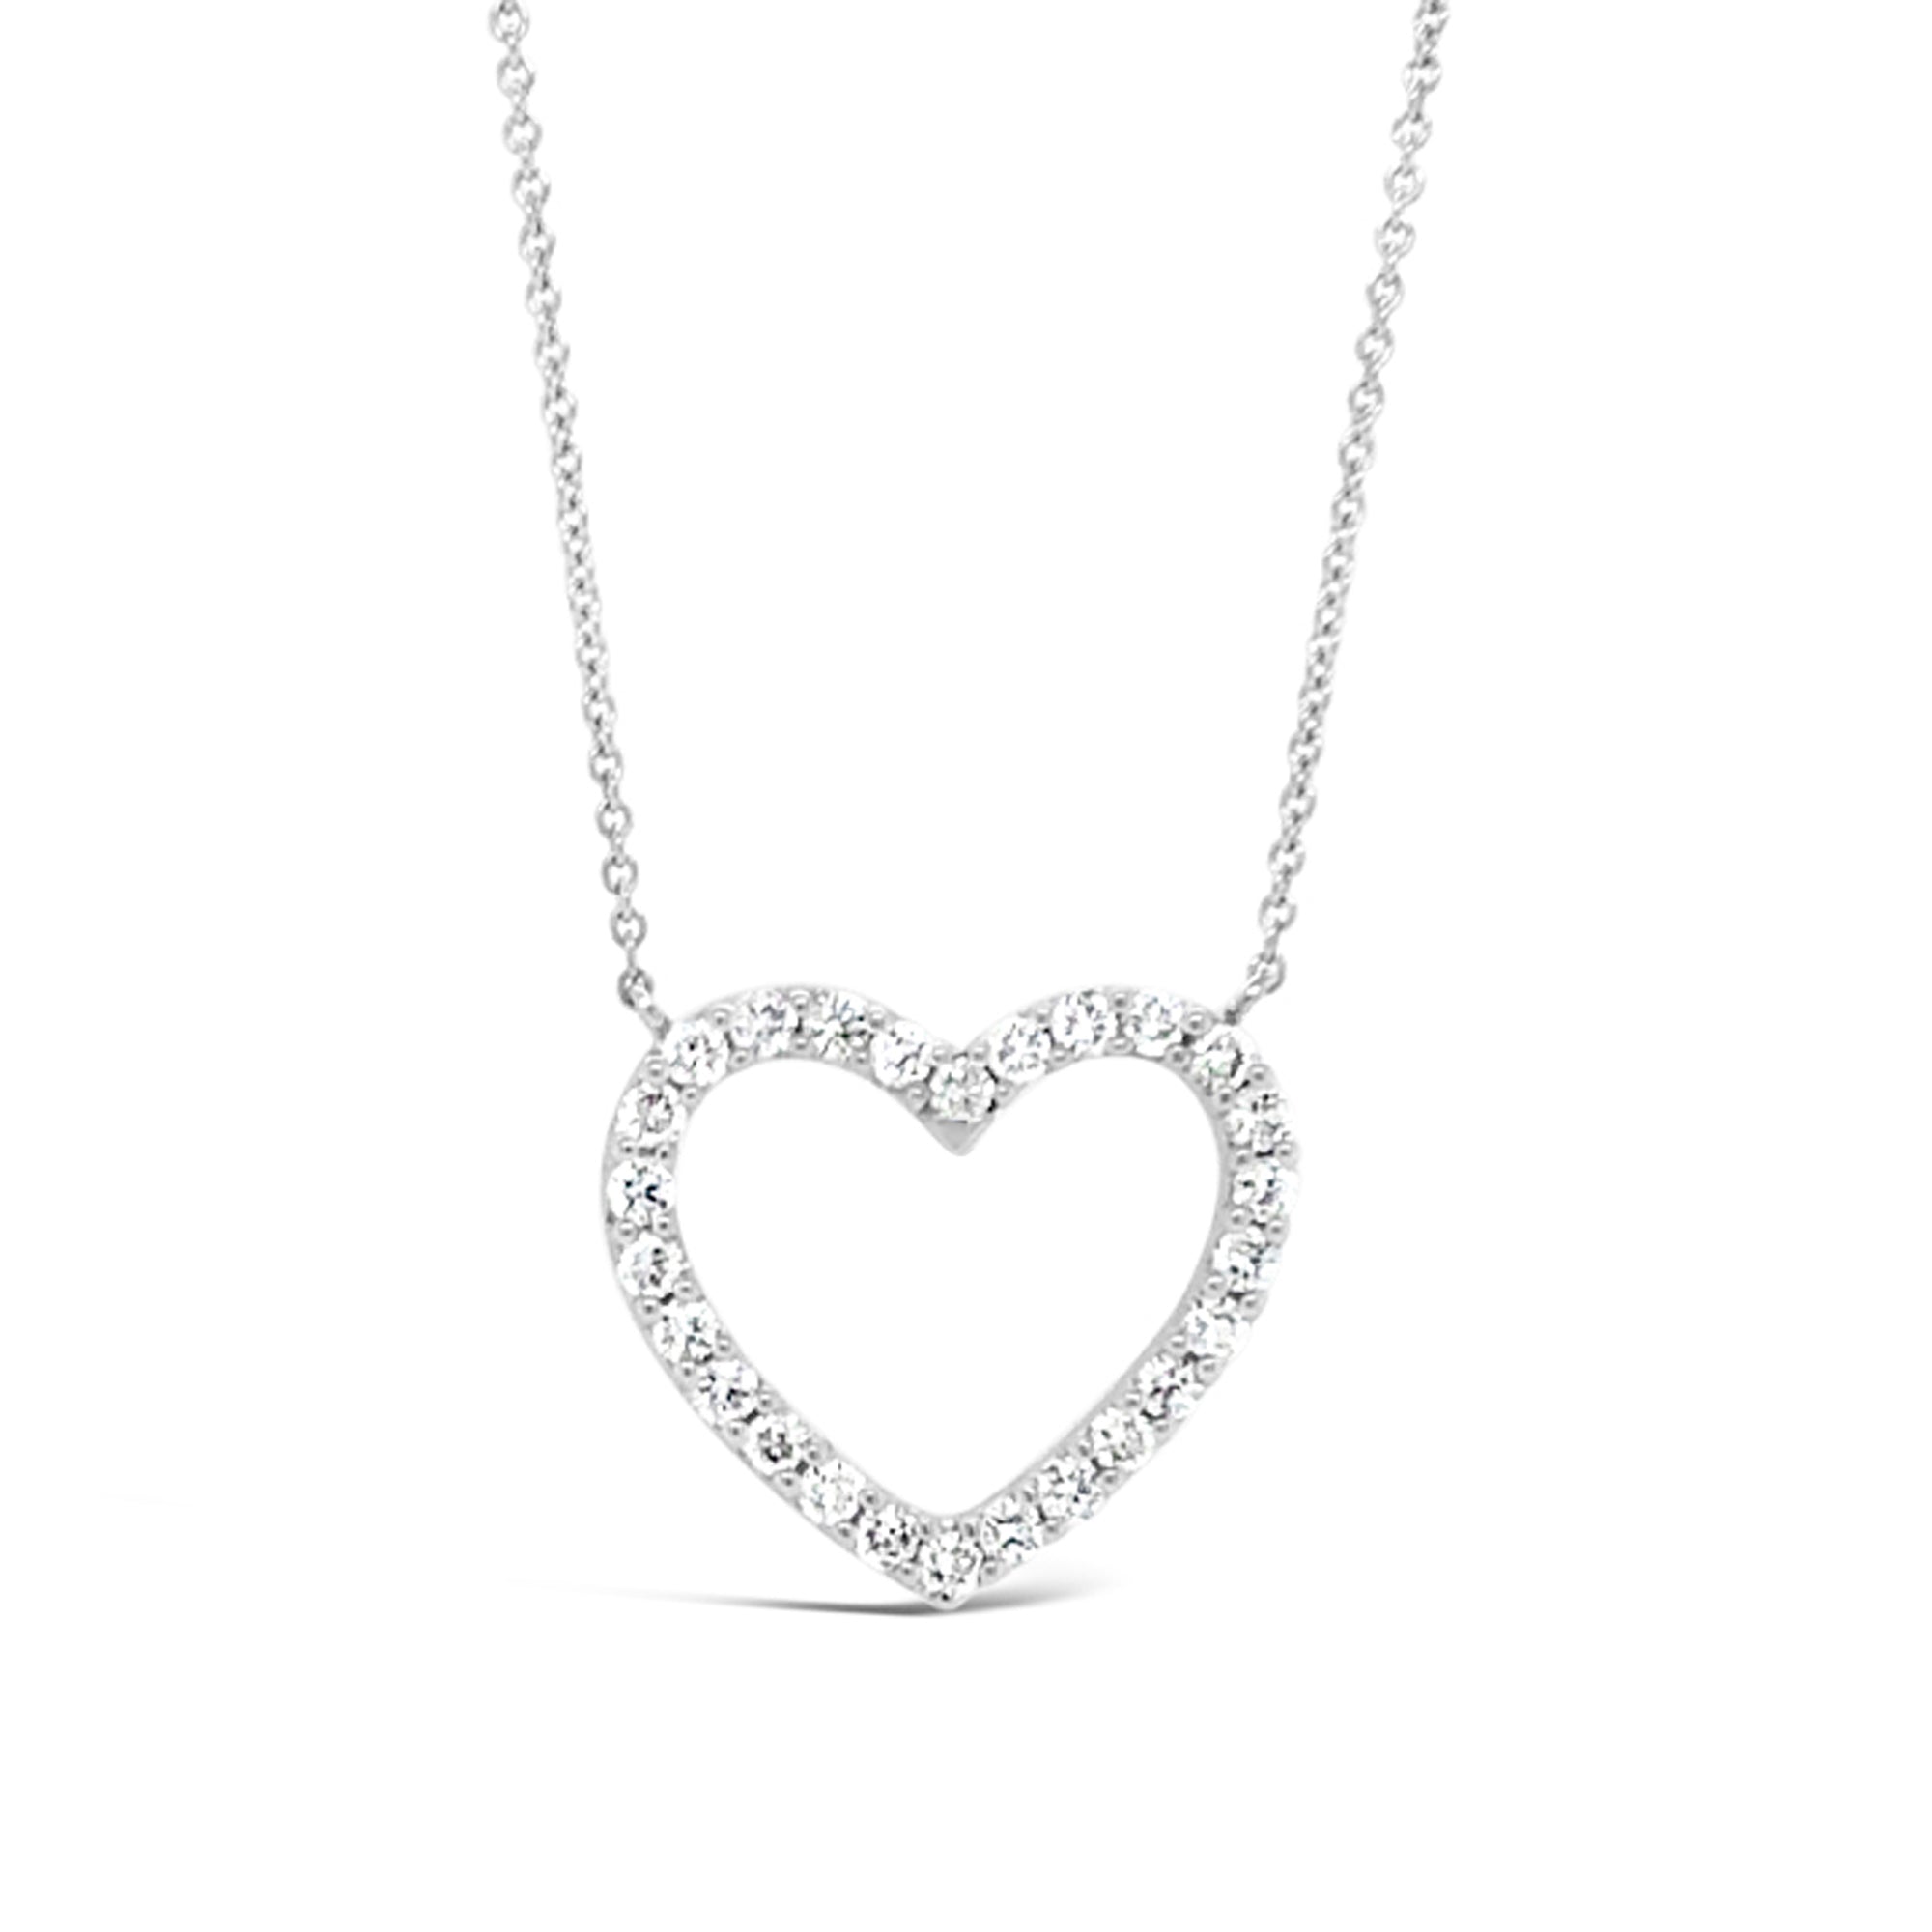 Heart Outline Pendant Necklace  -18k gold weighting 2.81 grams  -26 round diamonds weighing .46 grams